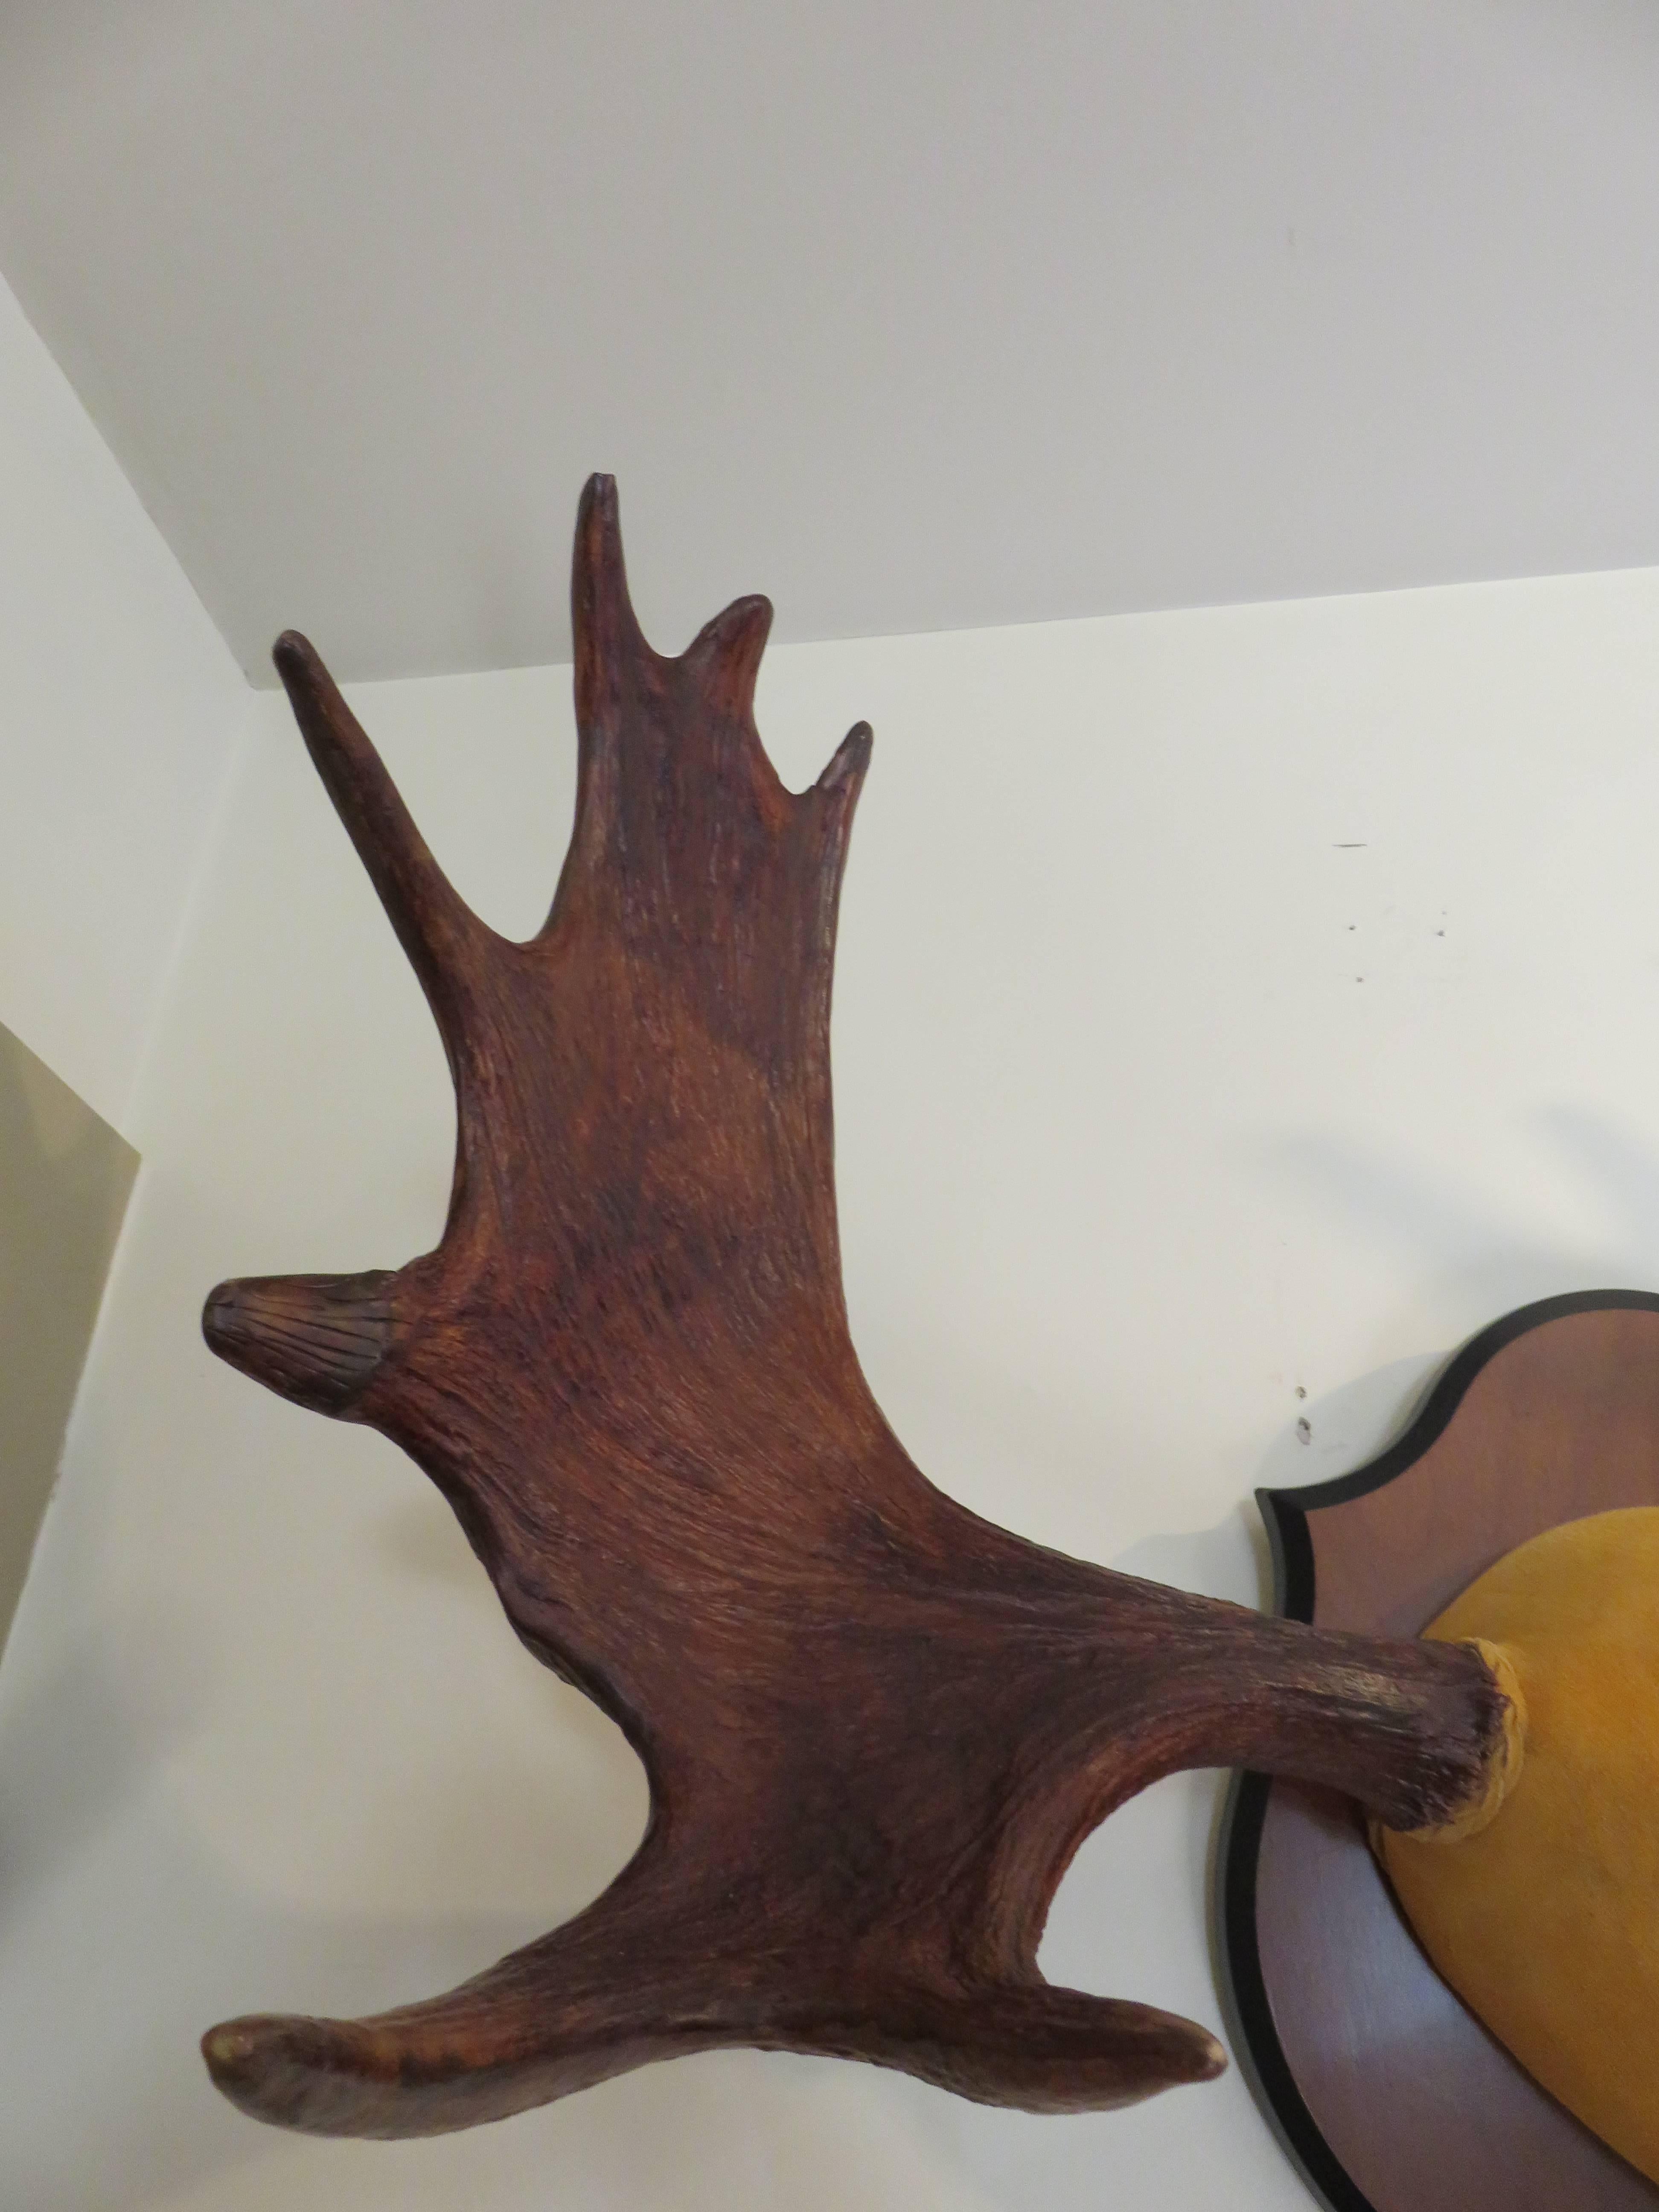 Large trophy quality large Moose Antlers, mounted on buck suede skin, nice semi-try and form. Excellent condition, Mid-Century.
One of several from a private collection.